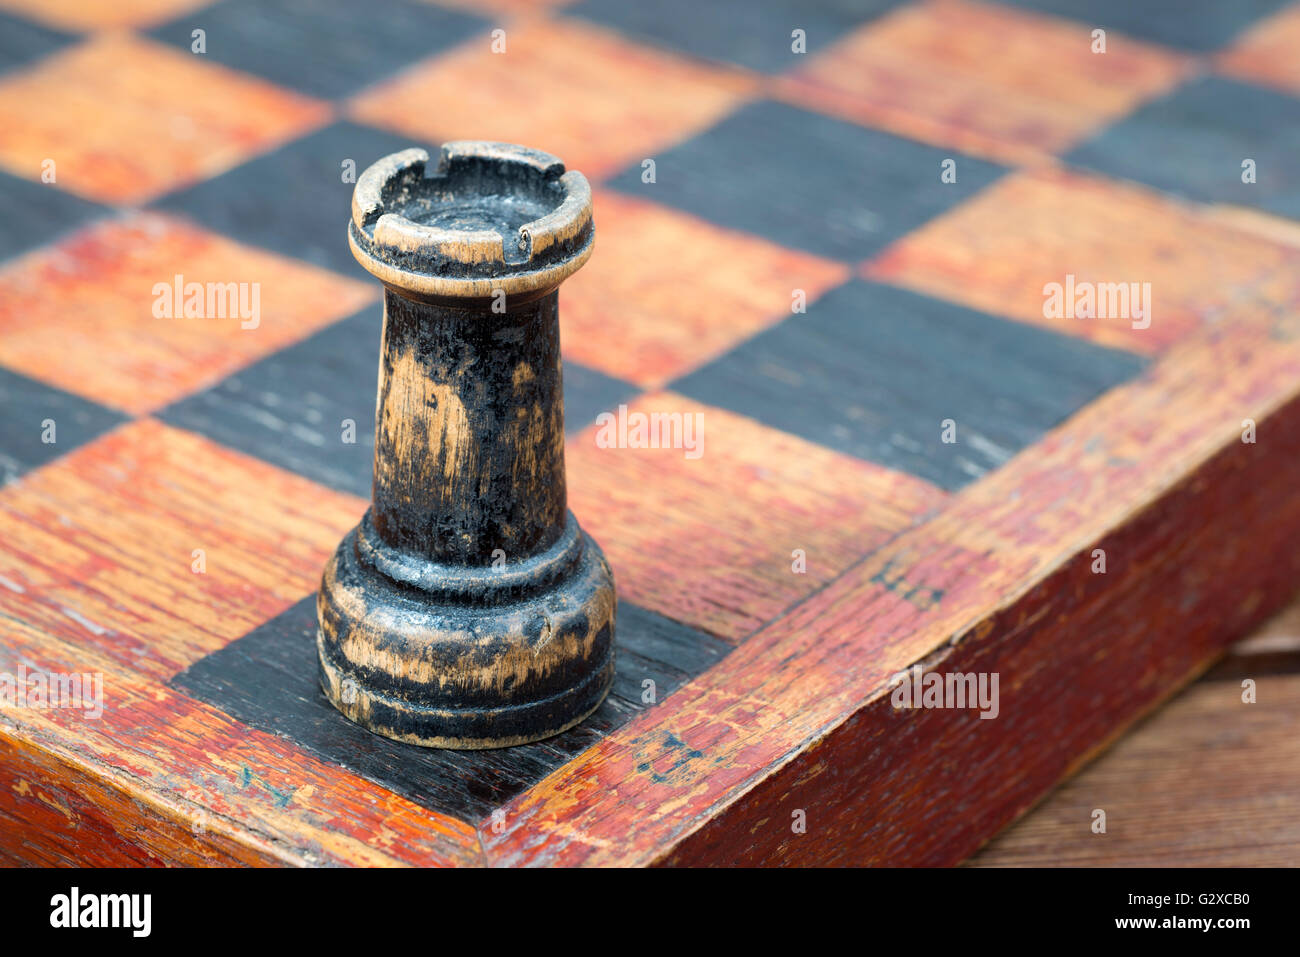 Close-up of a rook chess piece Stock Photo - Alamy